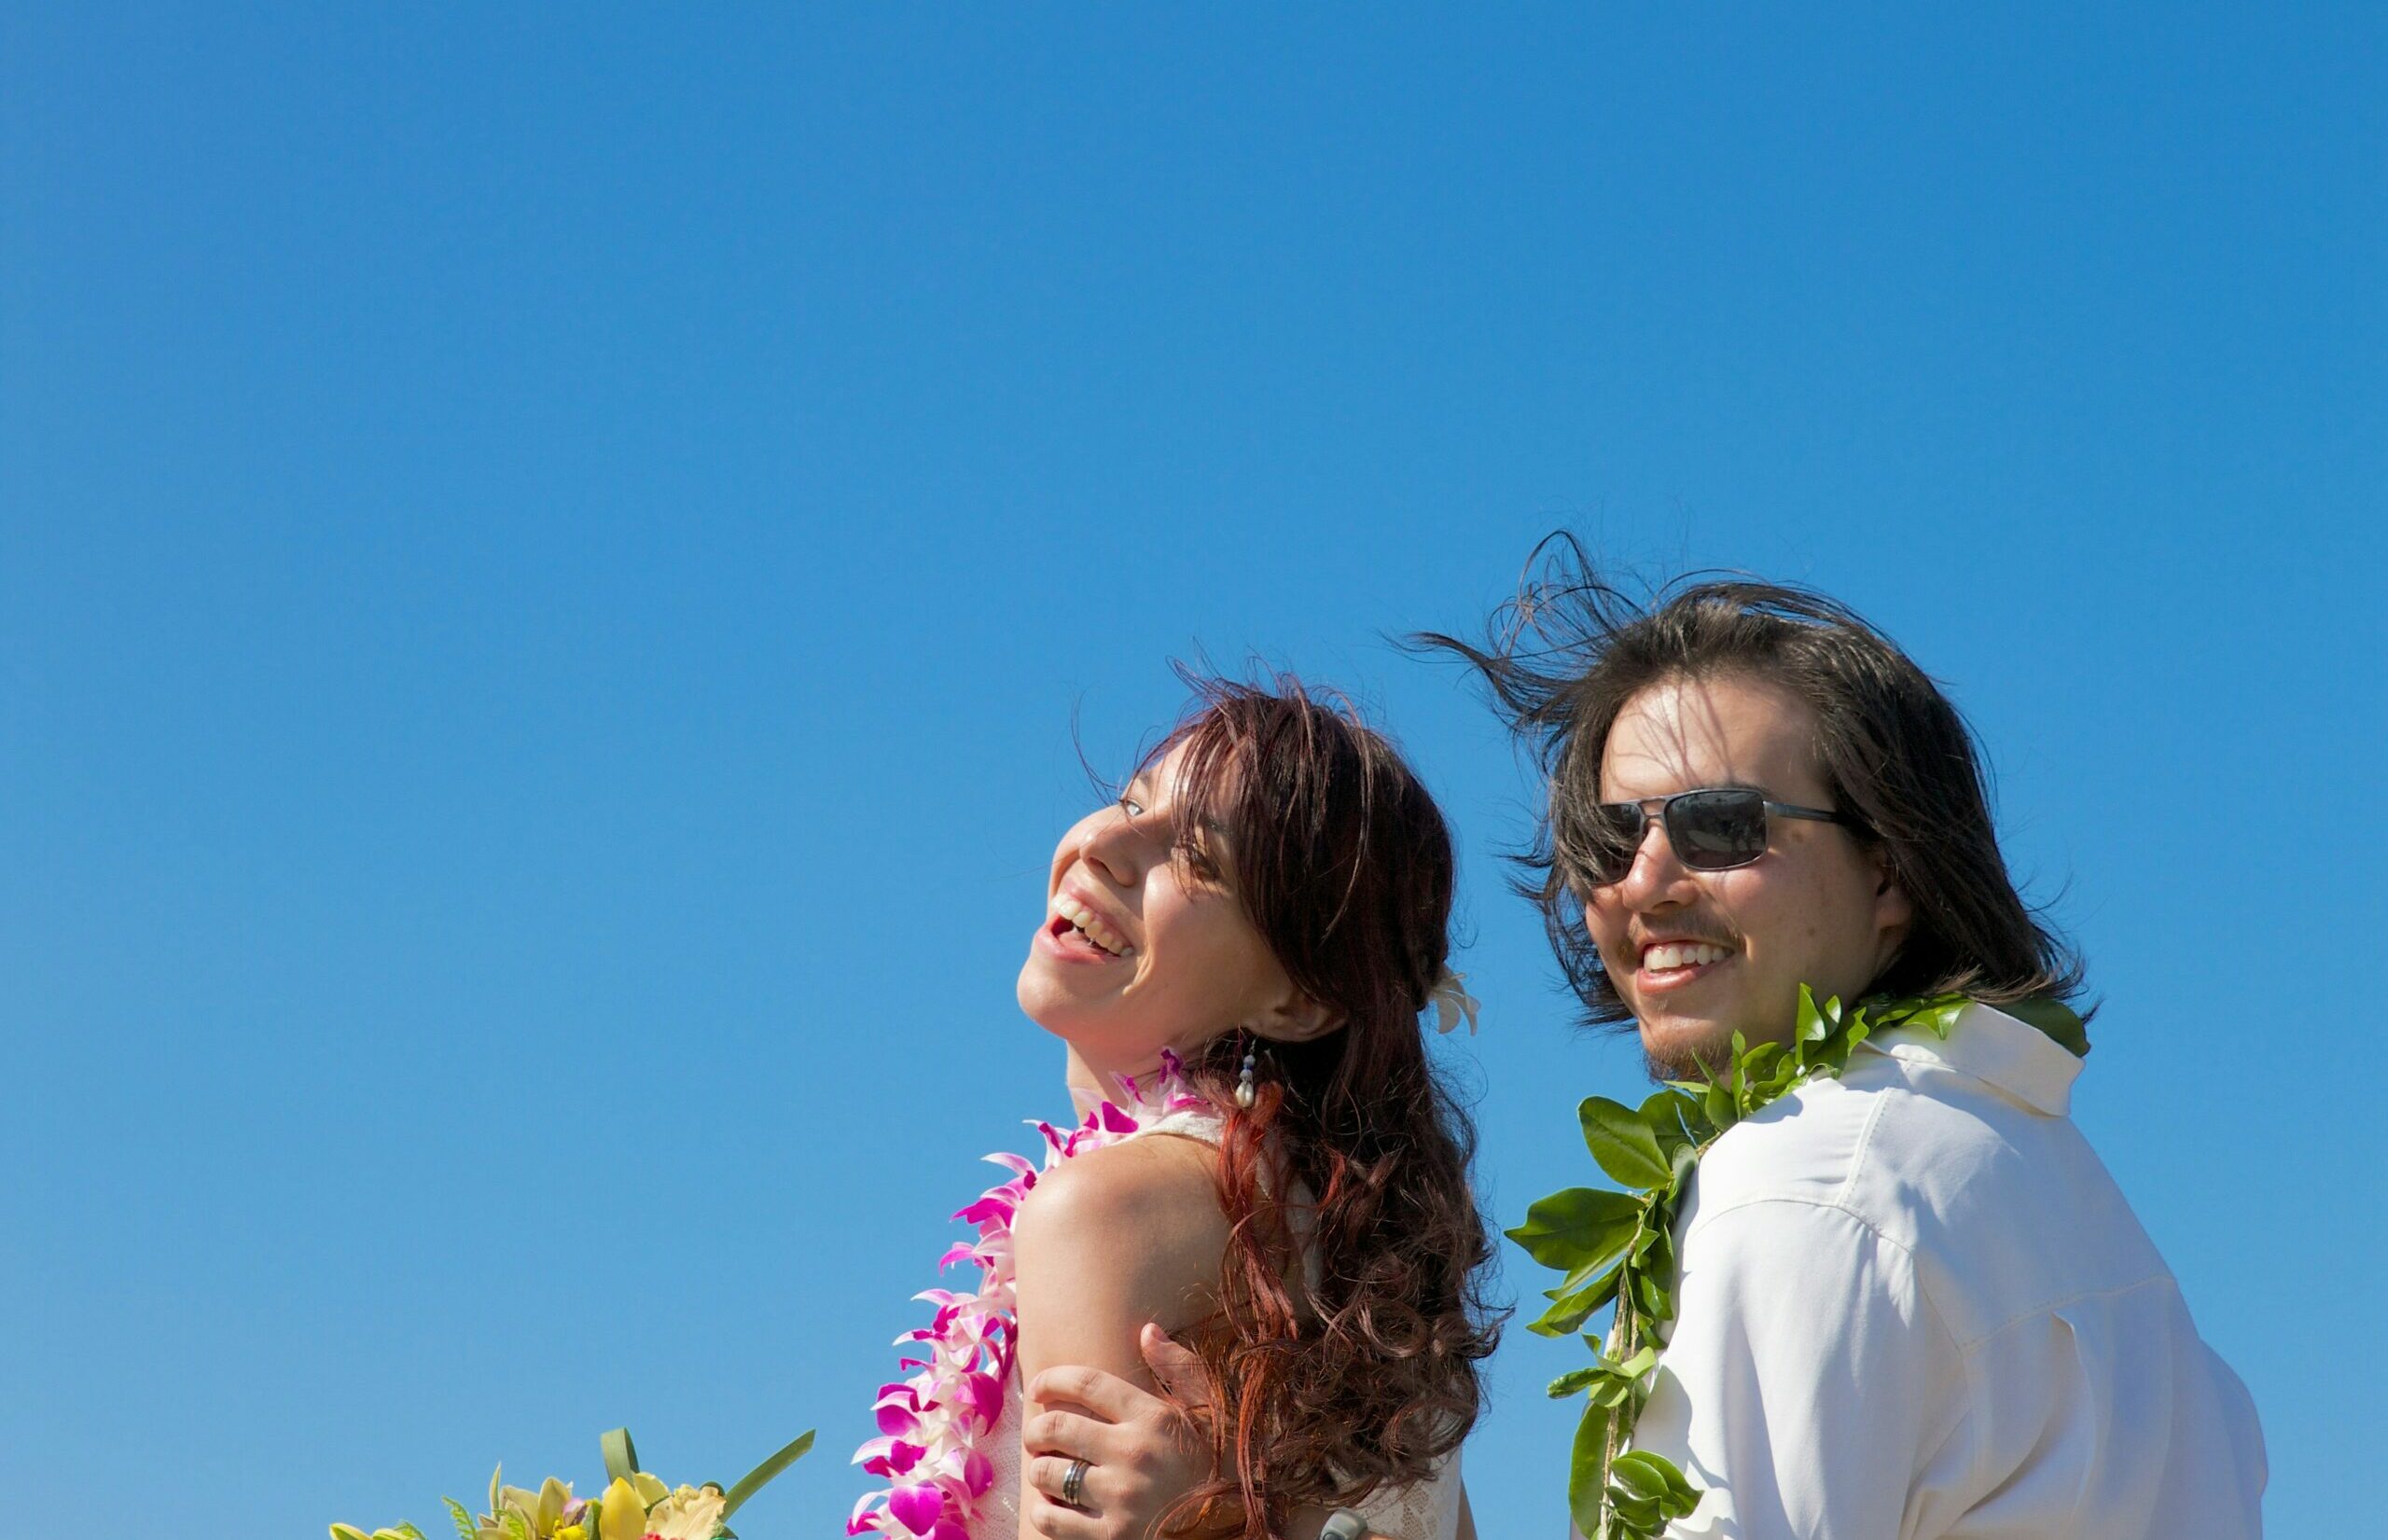 Smiling couple wearing leis with blue sky in background